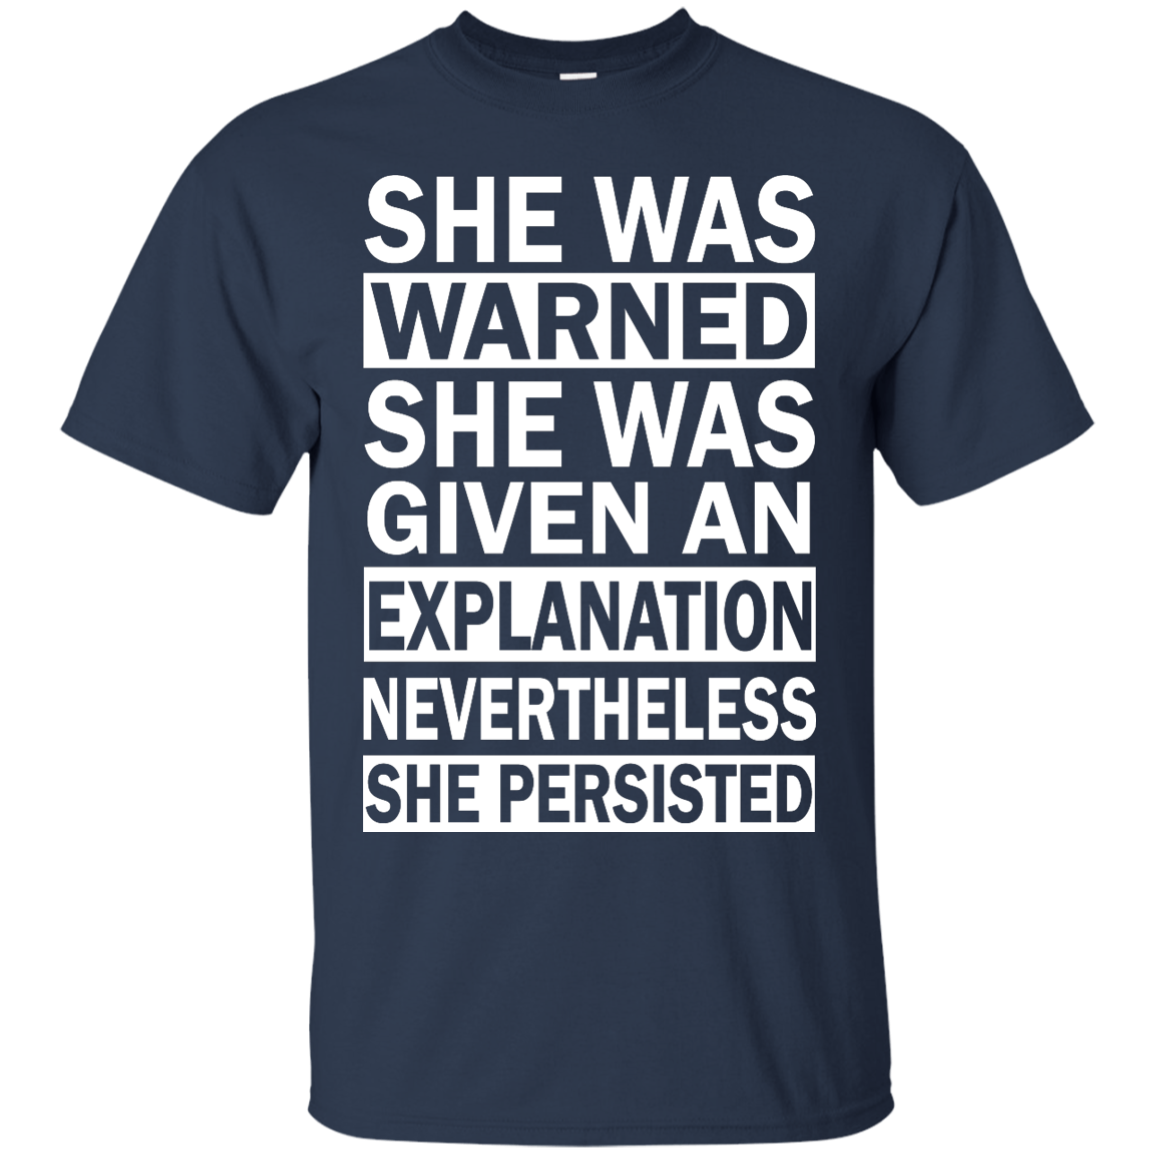 She Persisted: She Was Warned She Was Given an Explanation Shirt